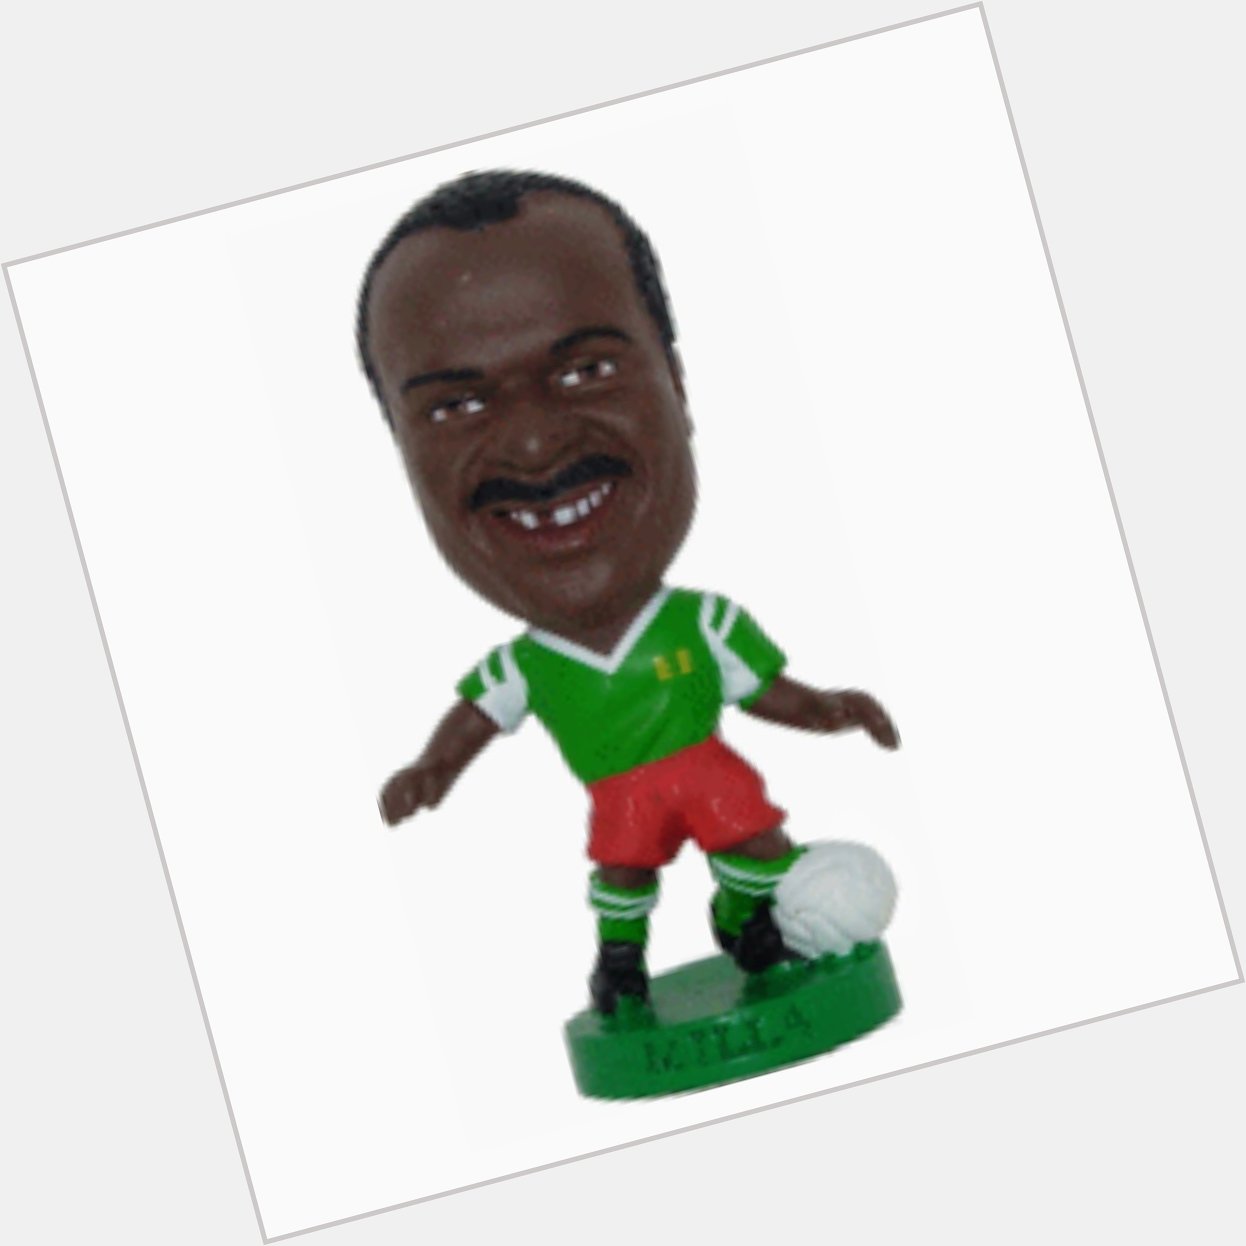  Happy birthday to the legend Roger Milla. Oldest goalscorer at the 